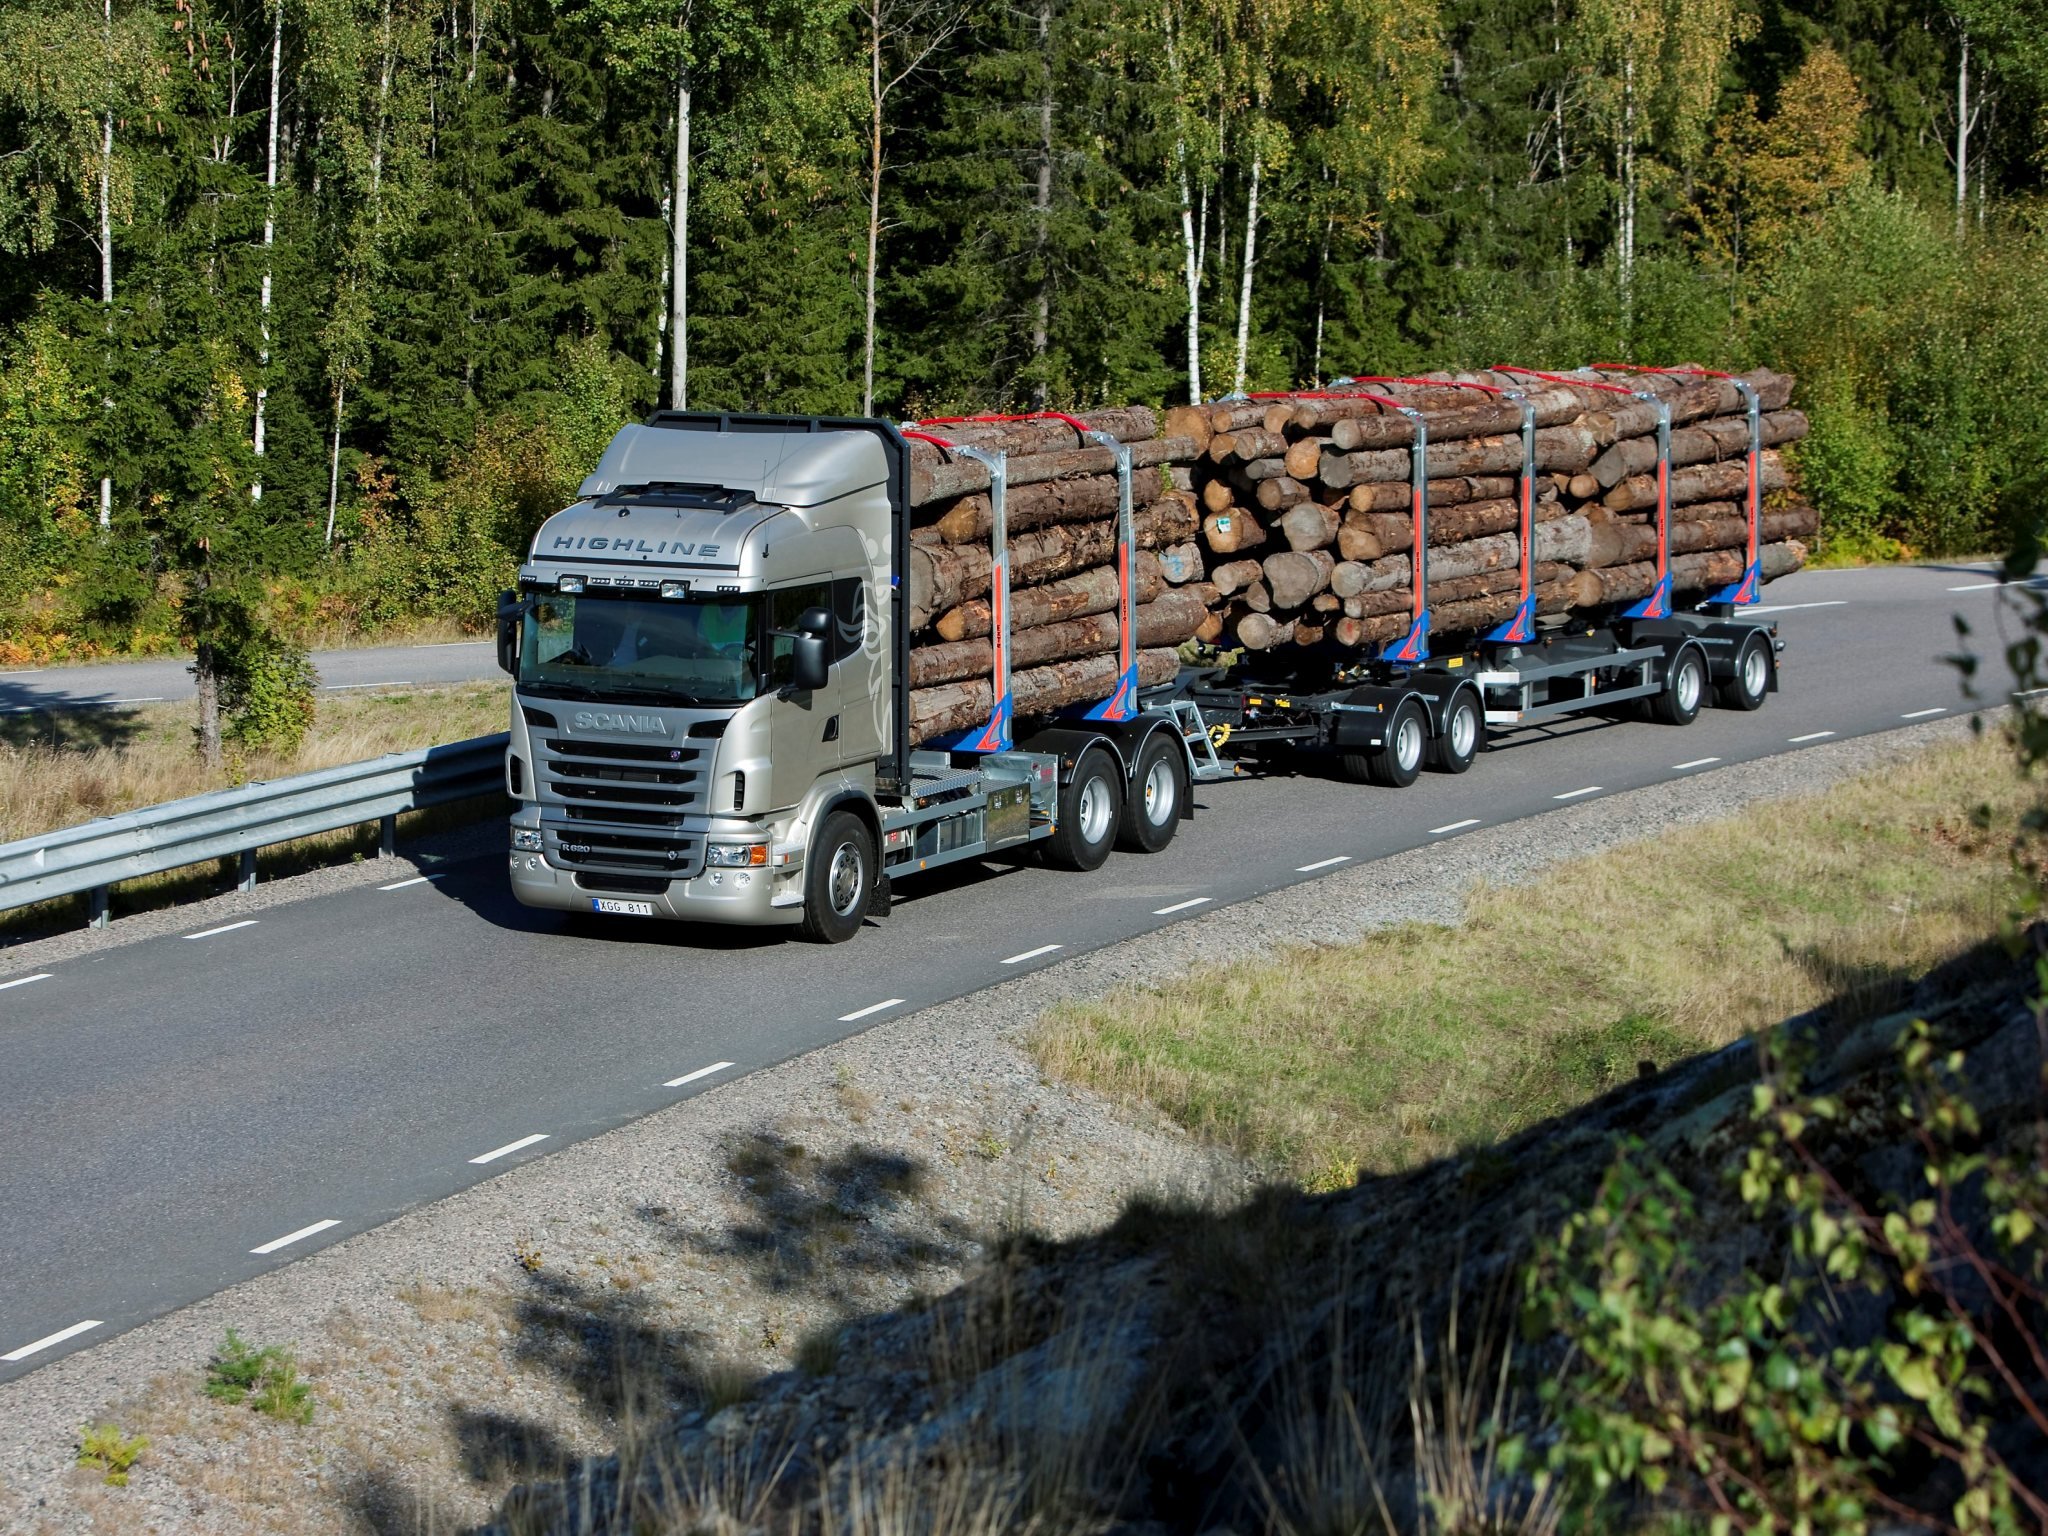 2009, Scania, R620, 6x4, Highline, Timber, Truck, Semi, Tractor Wallpaper